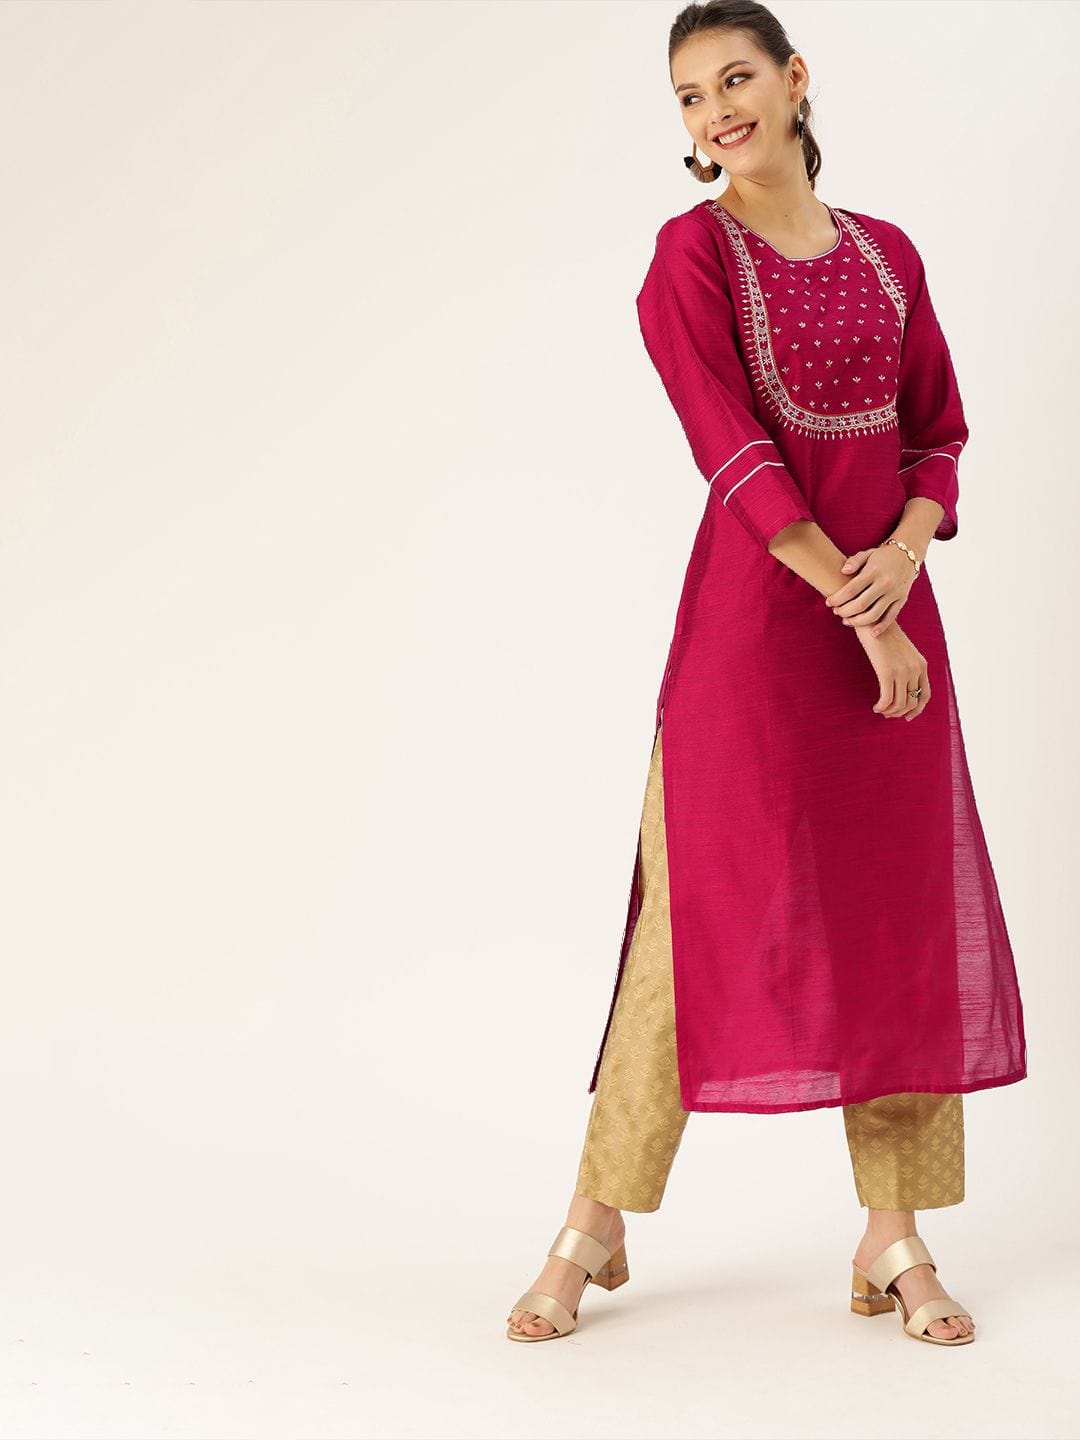 Buy Latest Designer Kurtis Online for Woman | Handloom, Cotton, Silk  Designer Kurtis Online - Sujatra – Page 8